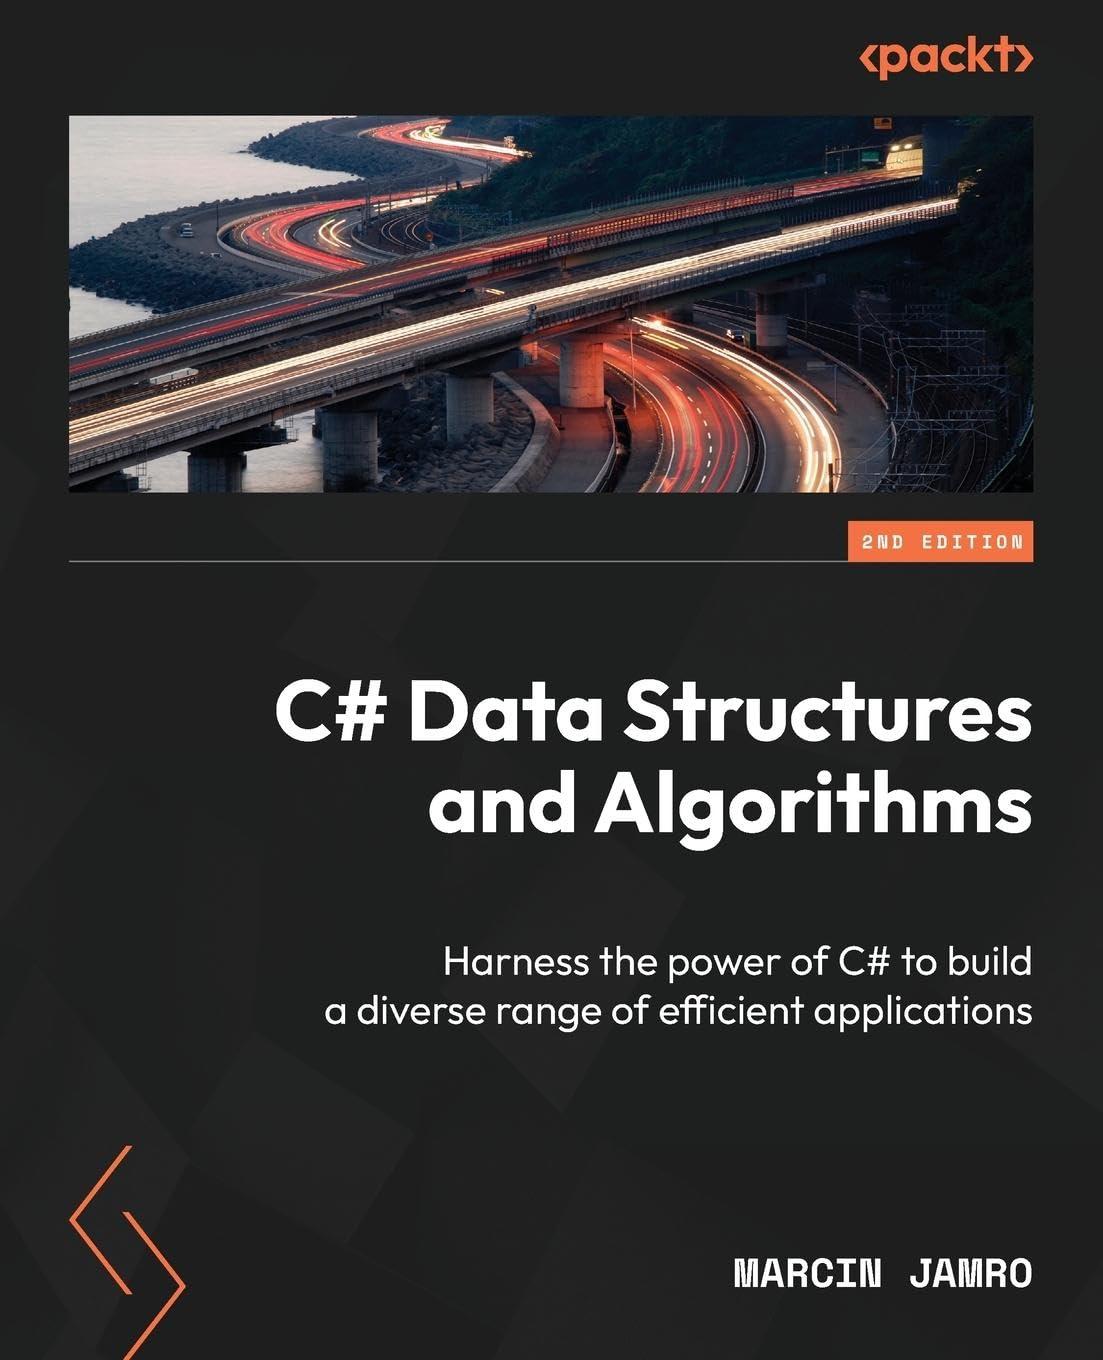 c# data structures and algorithms - harness the power of c# to build a diverse range of efficient